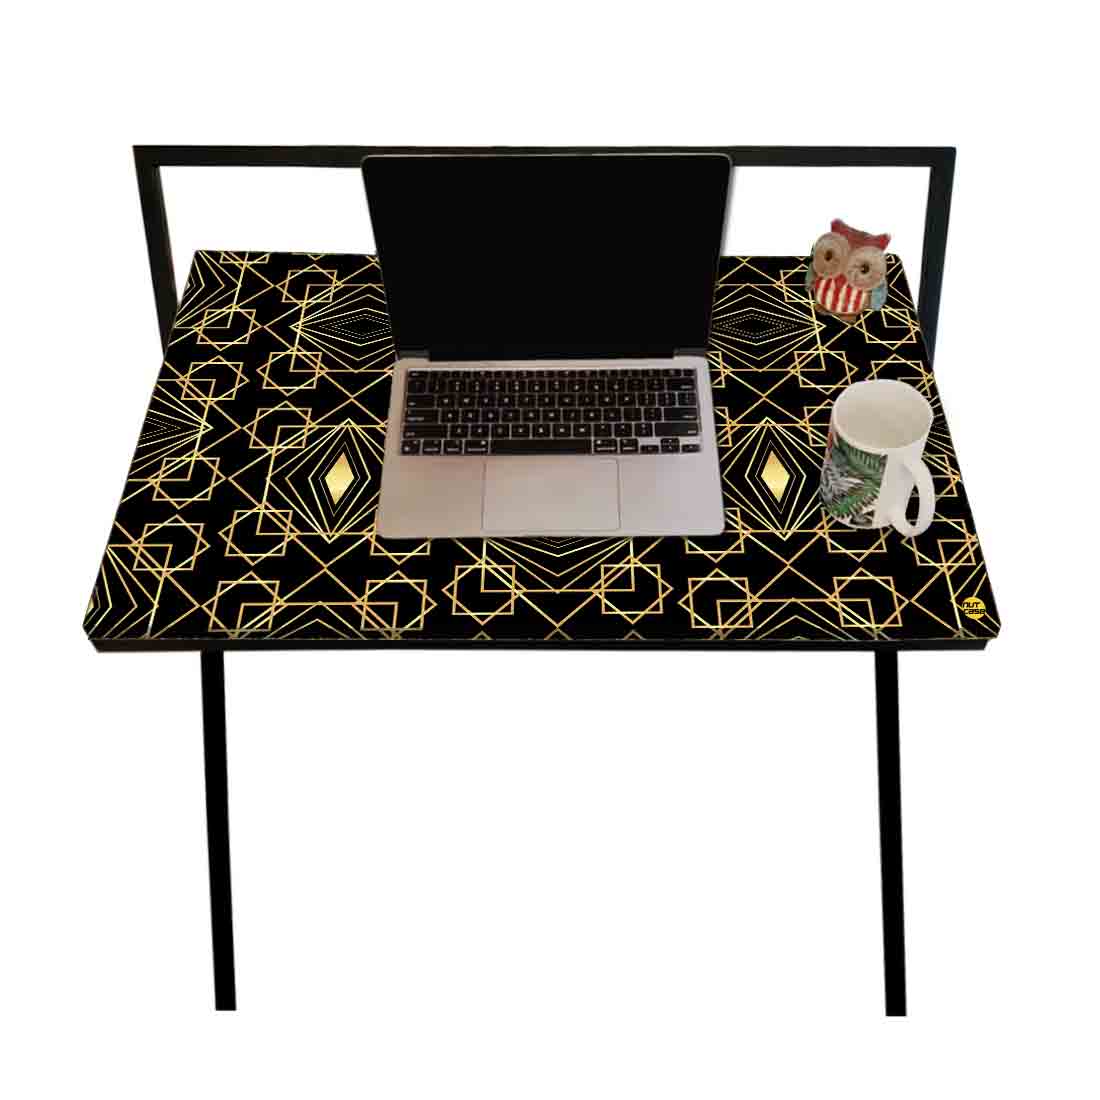 Foldable Small Computer Table for Bedroom Study Desk Nutcase